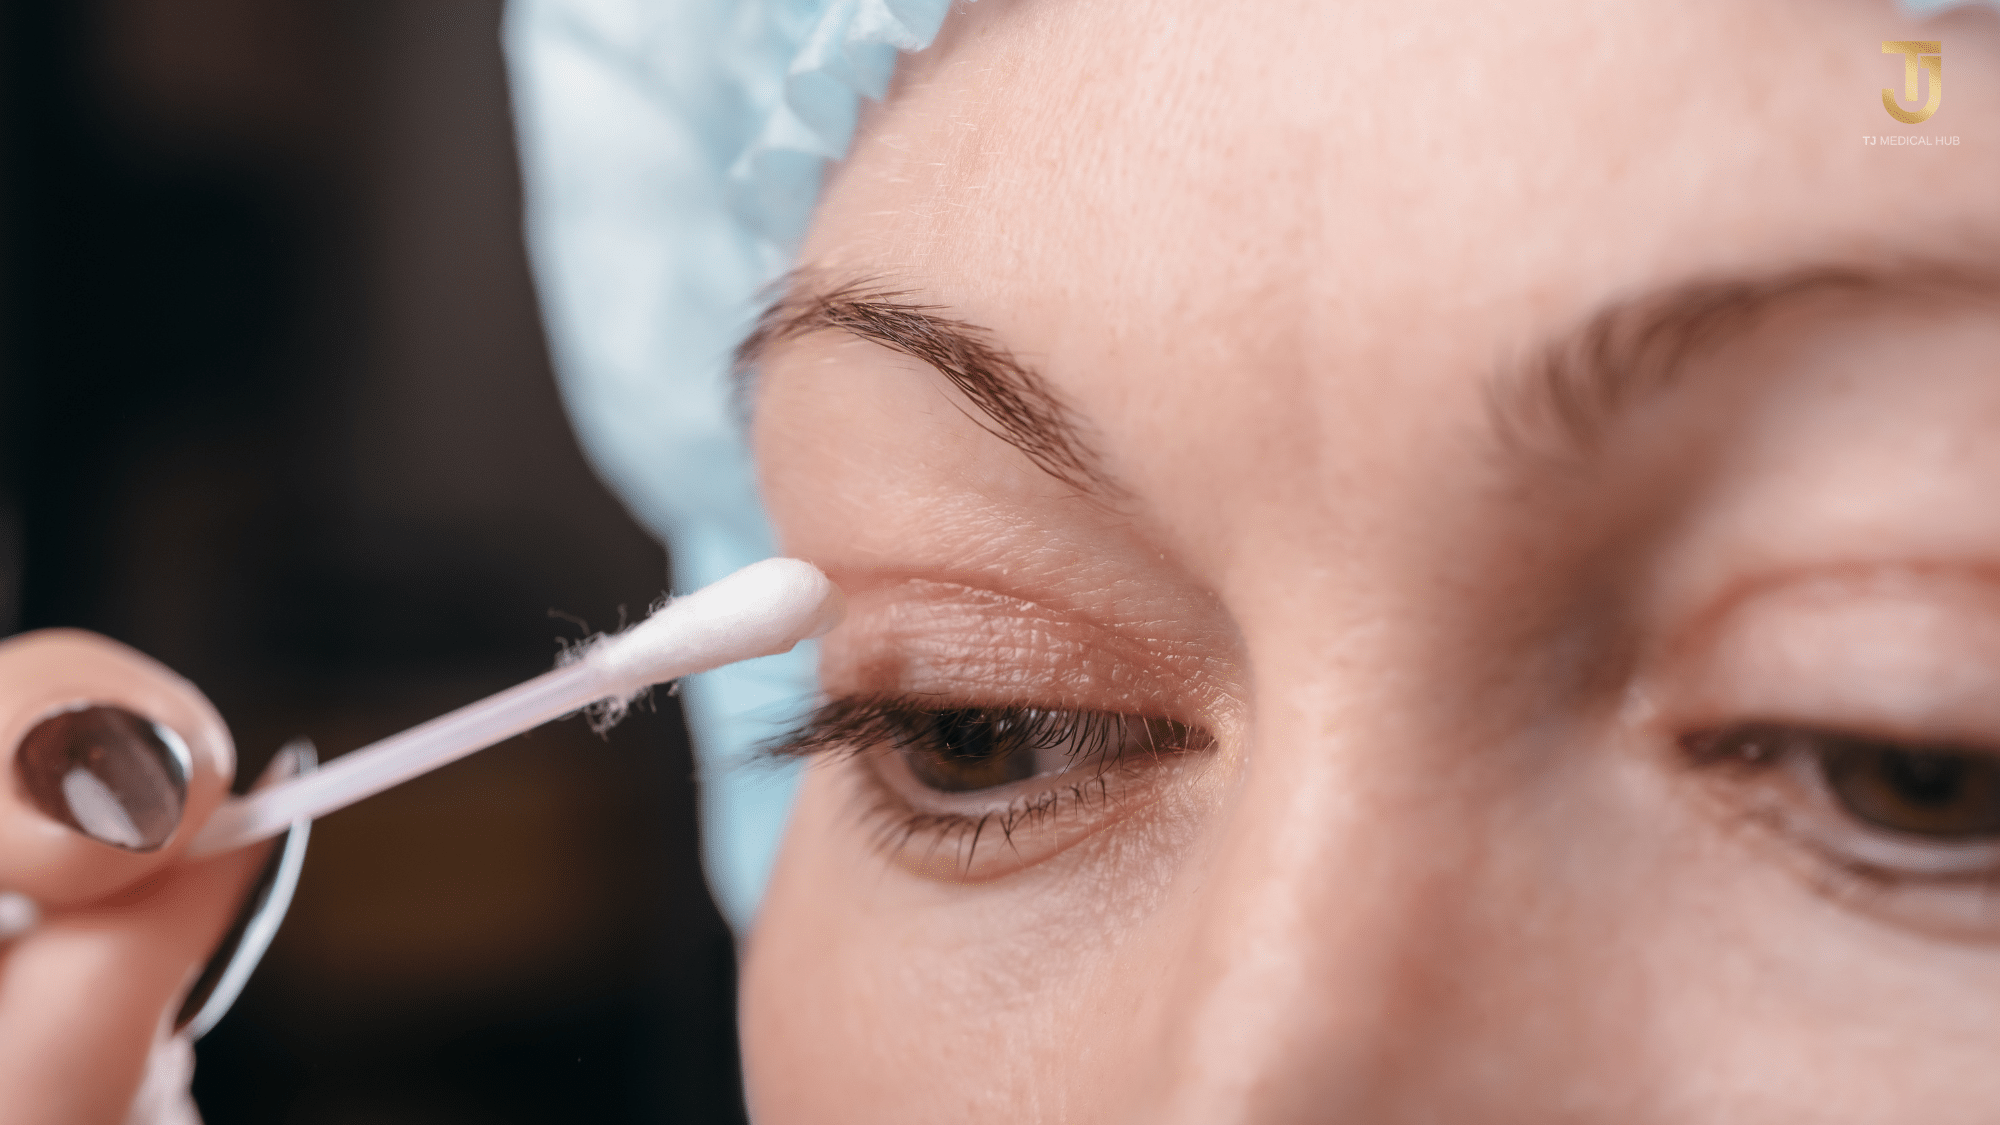 Cost of Eyelid Surgery in Thailand